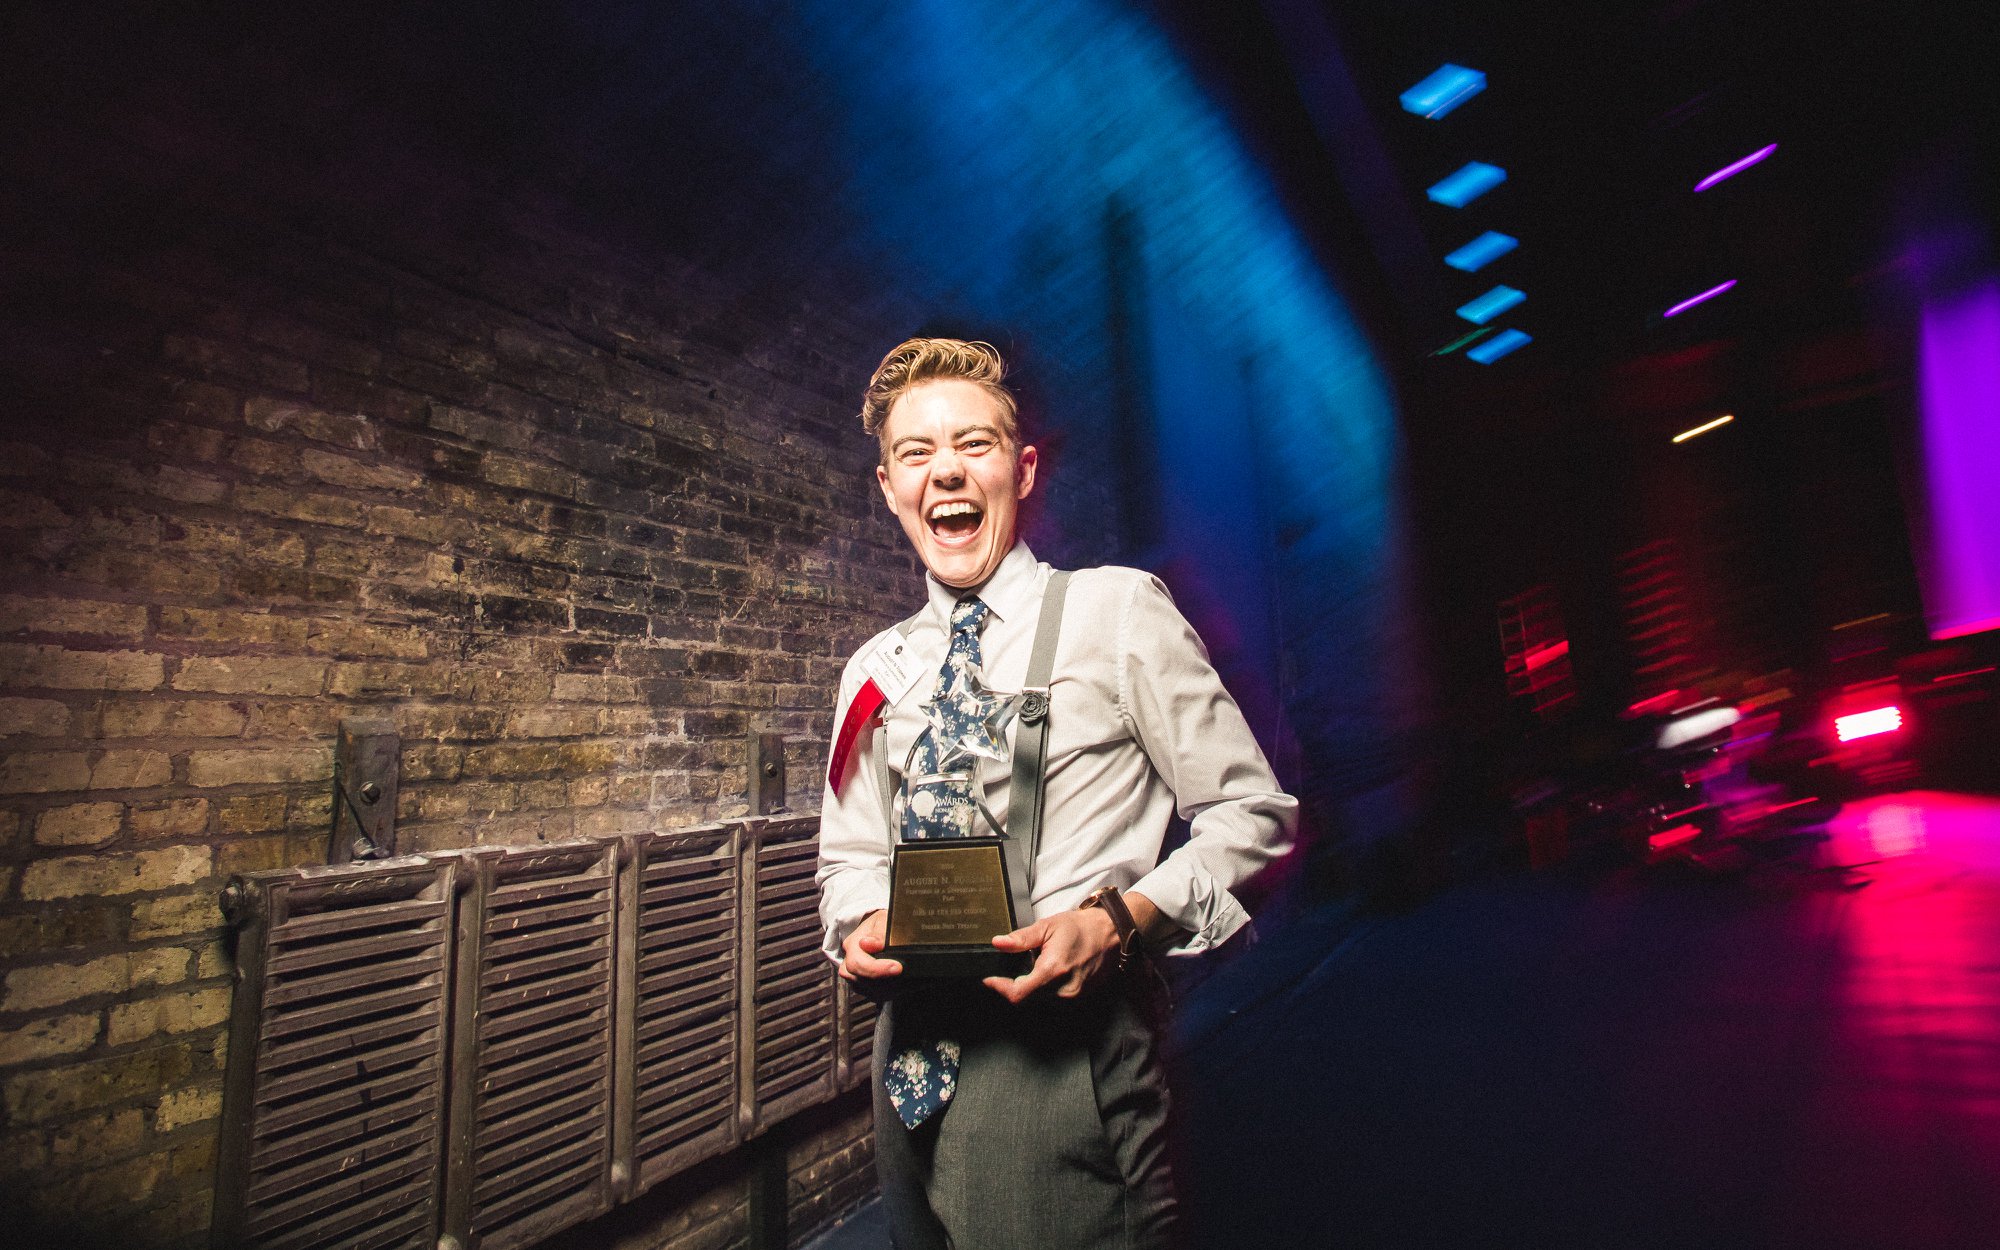 August Forman holding the 2019 Jeff Award backstage